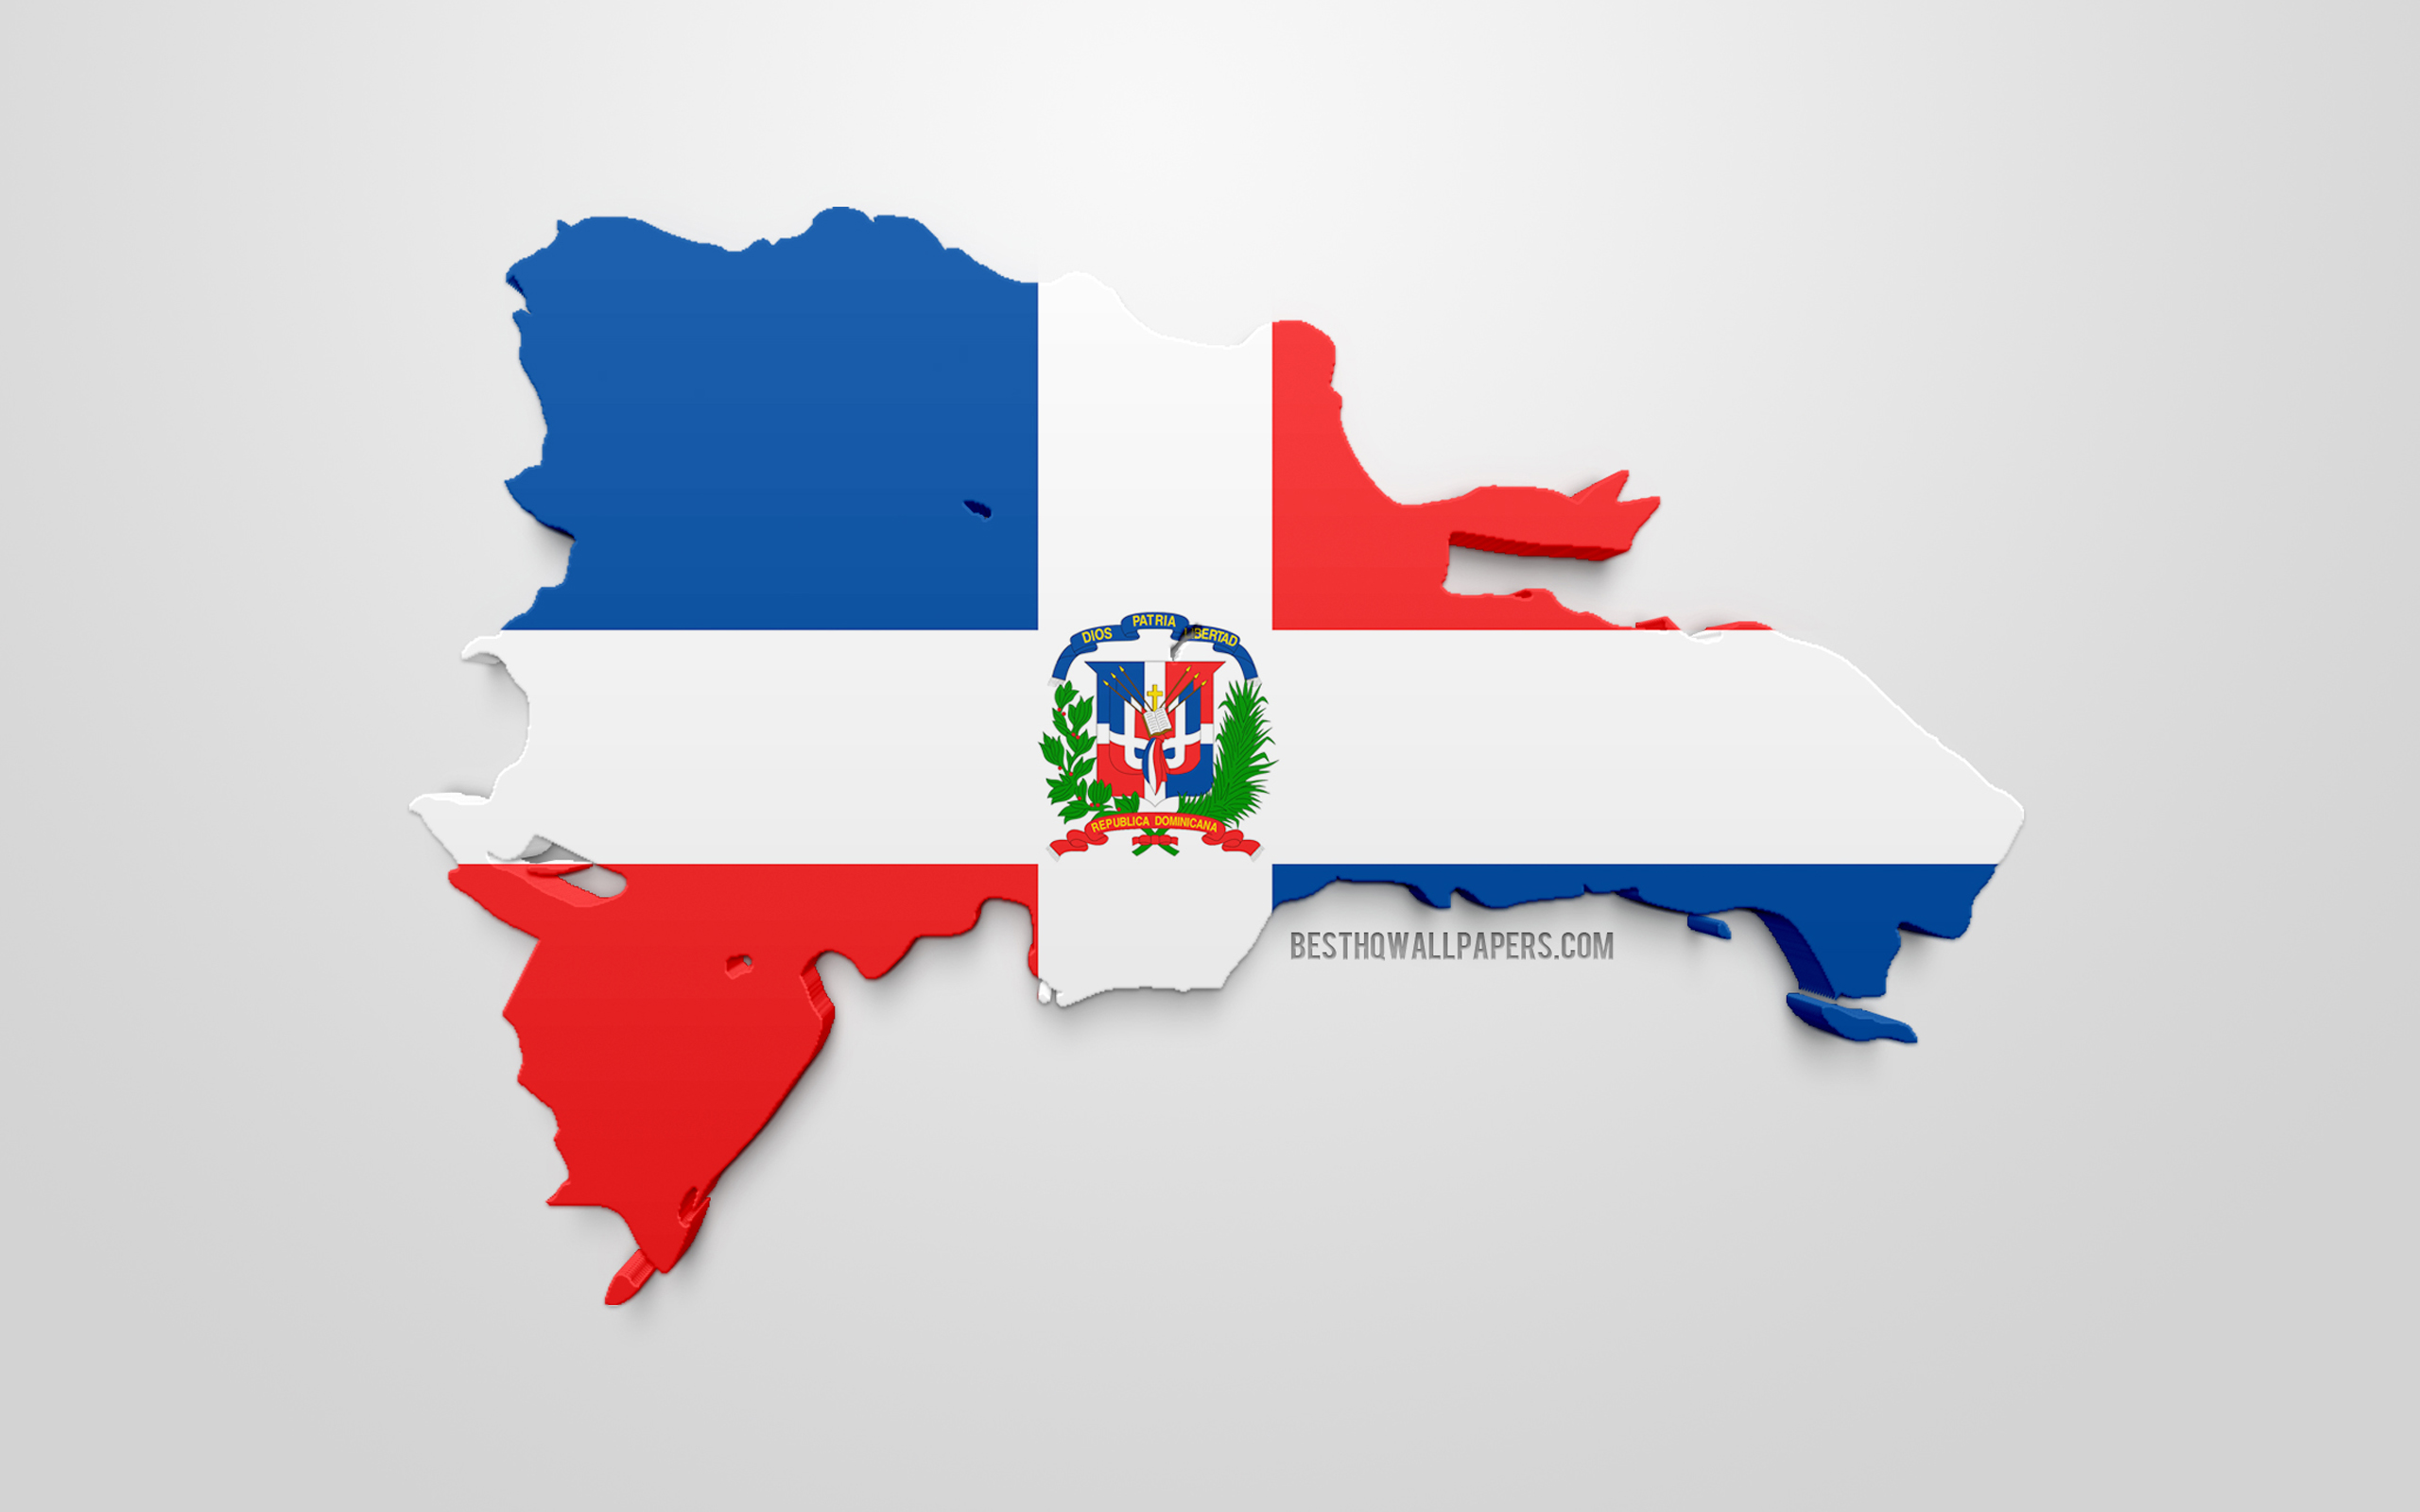 Download wallpaper 3D flag of Dominican Republic, silhouette of the Republic of Dominican Republic, 3D art, North America, Dominican Republic, geography, Dominican Republic 3D silhouette for desktop with resolution 2560x1600. High Quality